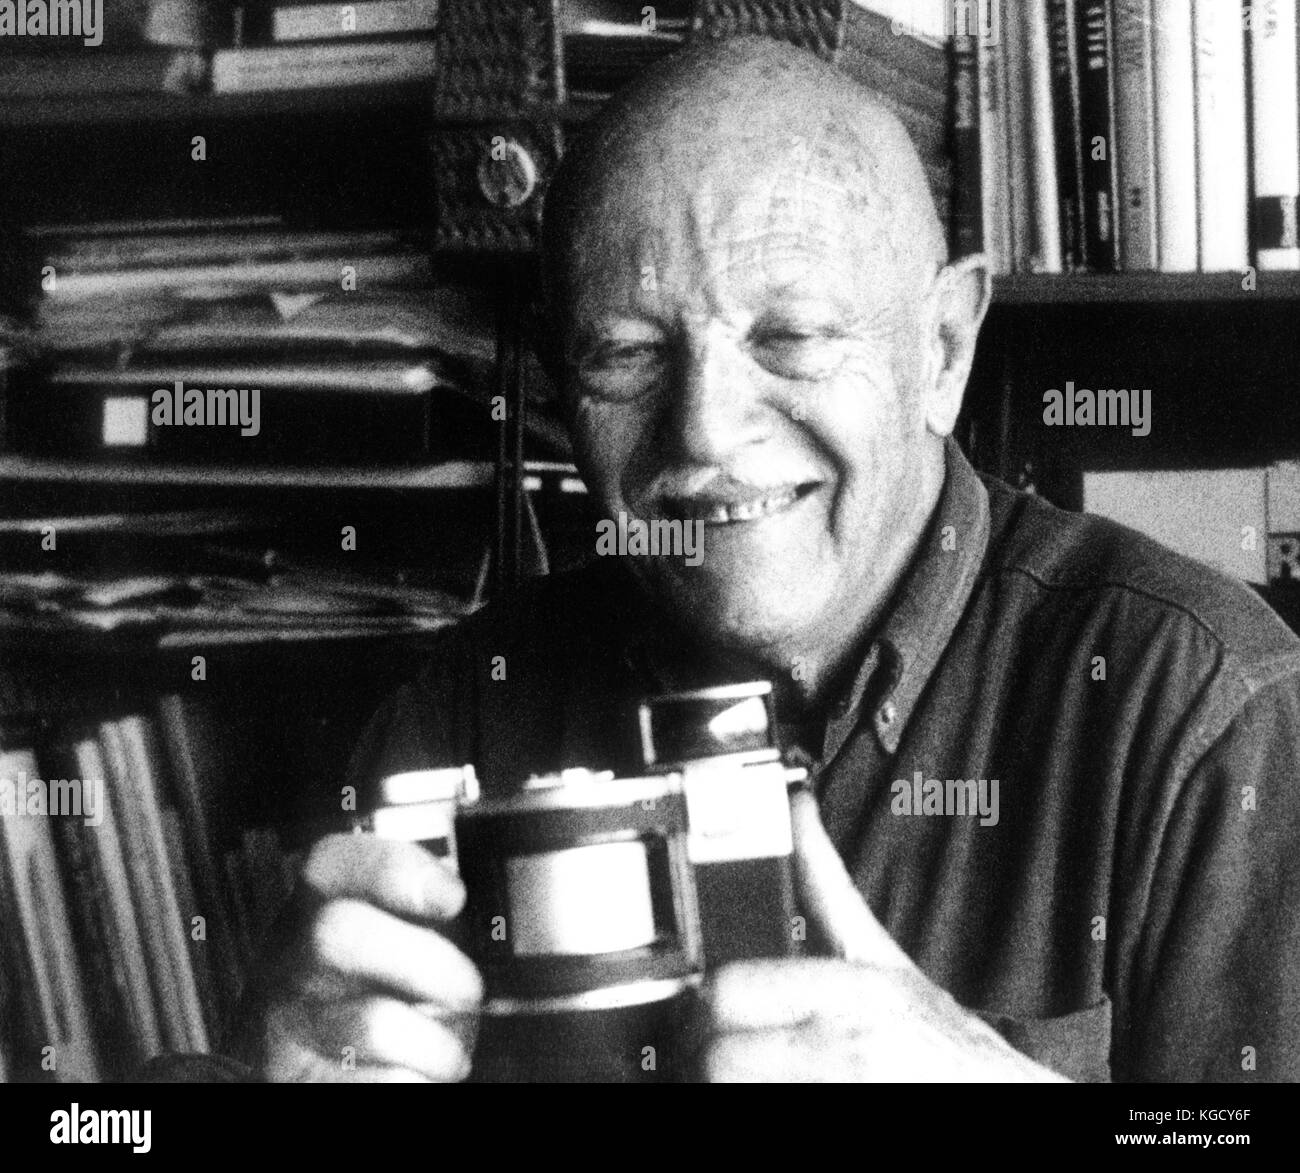 AJAXNETPHOTO. 1994. PARIS, FRANCE. - FRENCH PHOTOGRAPHER - WILLY RONIS (84) PICTURED IN HIS HOME WITH RUSSIAN HORIZONT PANORAMA CAMERA HE USED TO MAKE DYNAMIC PHOTOS. PHOTO: JONATHAN EASTLAND/AJAX REF: 1994 92210 1 Stock Photo